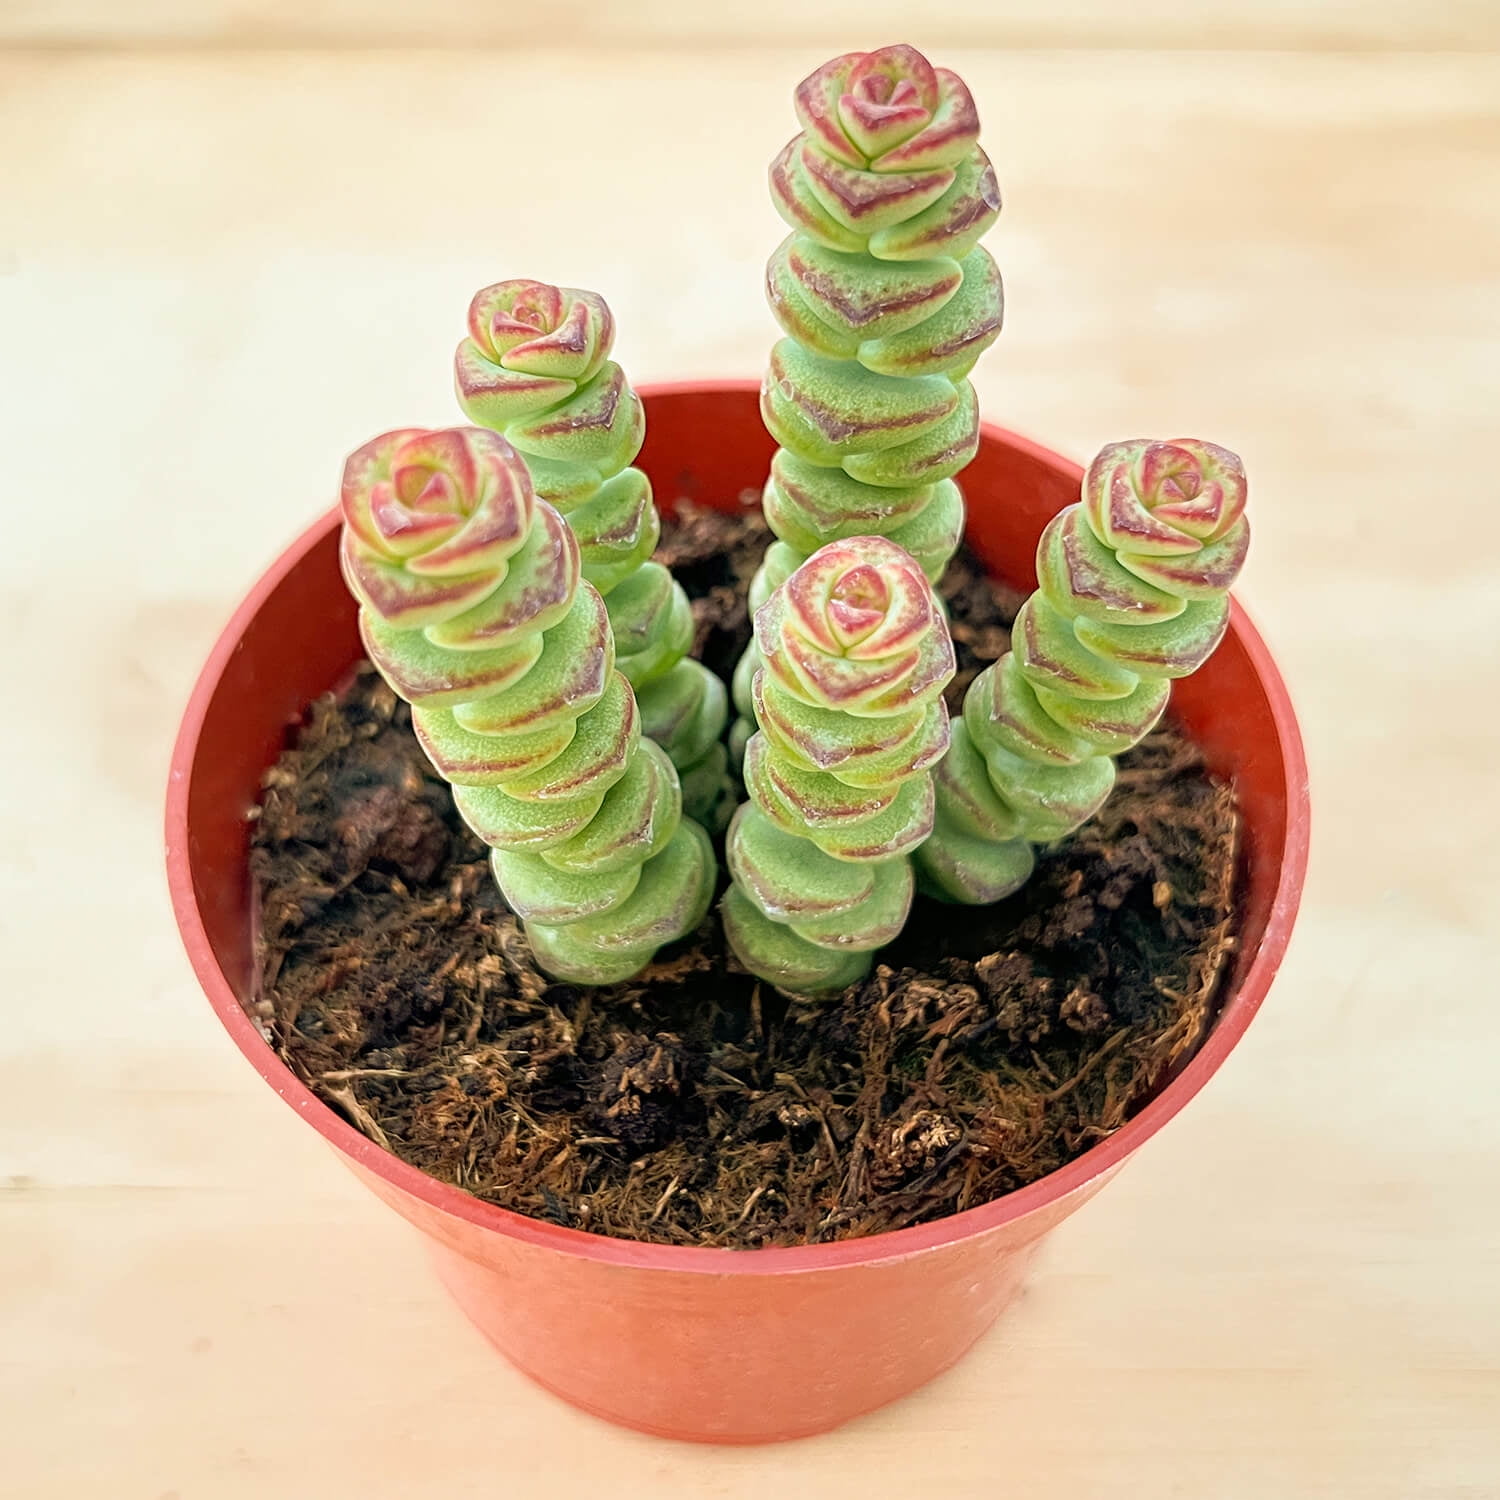 Live Crassula Baby Necklace Succulent Plant Rooted in 4 inch Planter Perfect for Office Garden Party Decor Succulent Gifts New Fresh 00f8777c ca16 49f3 8482 bdc249cebafa.1c2940f5ef58fbd3d935a4e1610c9c64